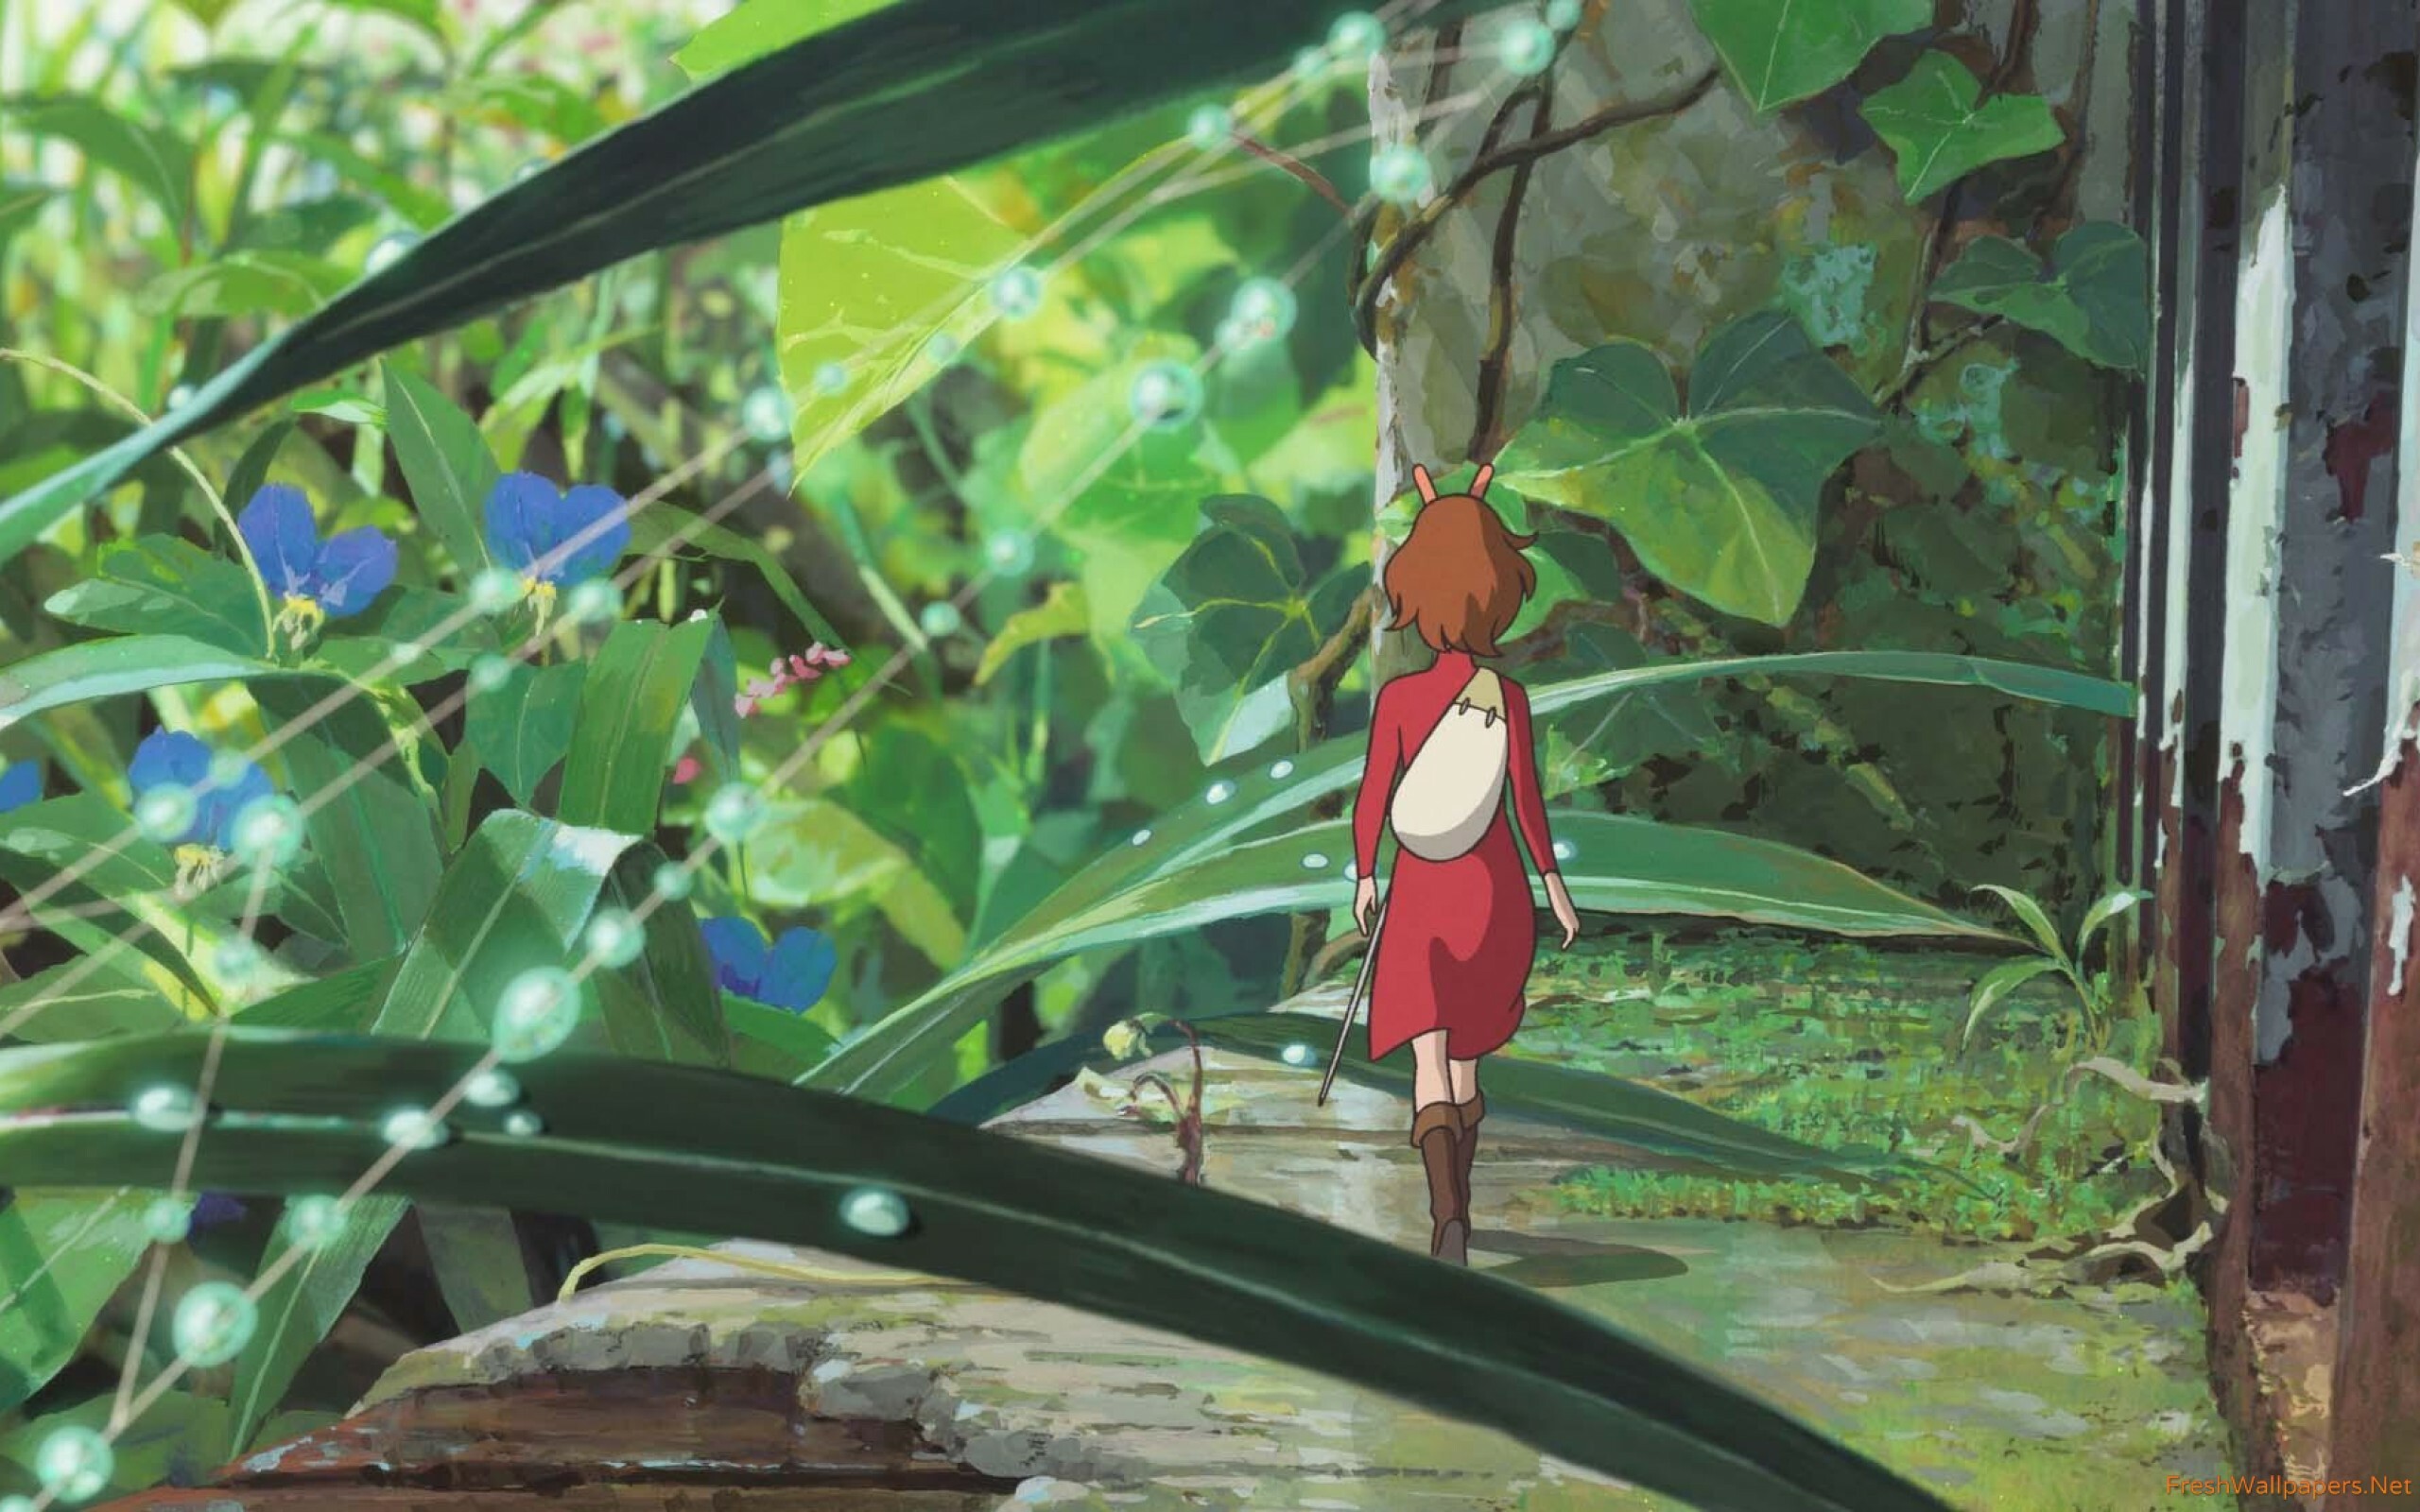 The Secret World of Arrietty: Based on the 1952 novel The Borrowers by Mary Norton, an English author of children's books. 2560x1600 HD Wallpaper.